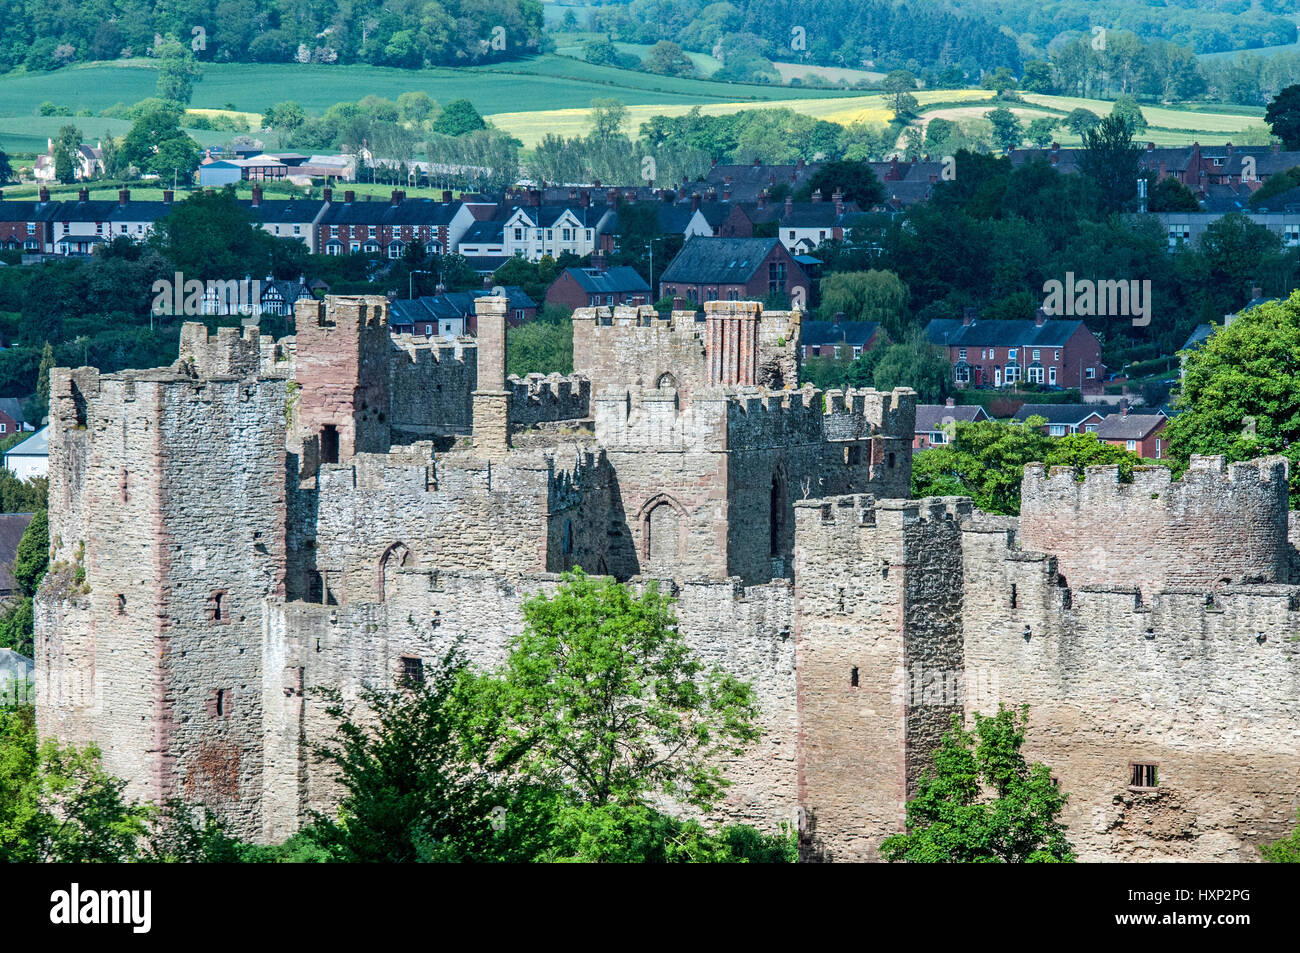 Ludlow Castle, in the Shropshire rural town of Ludlow as seen from above the town Stock Photo